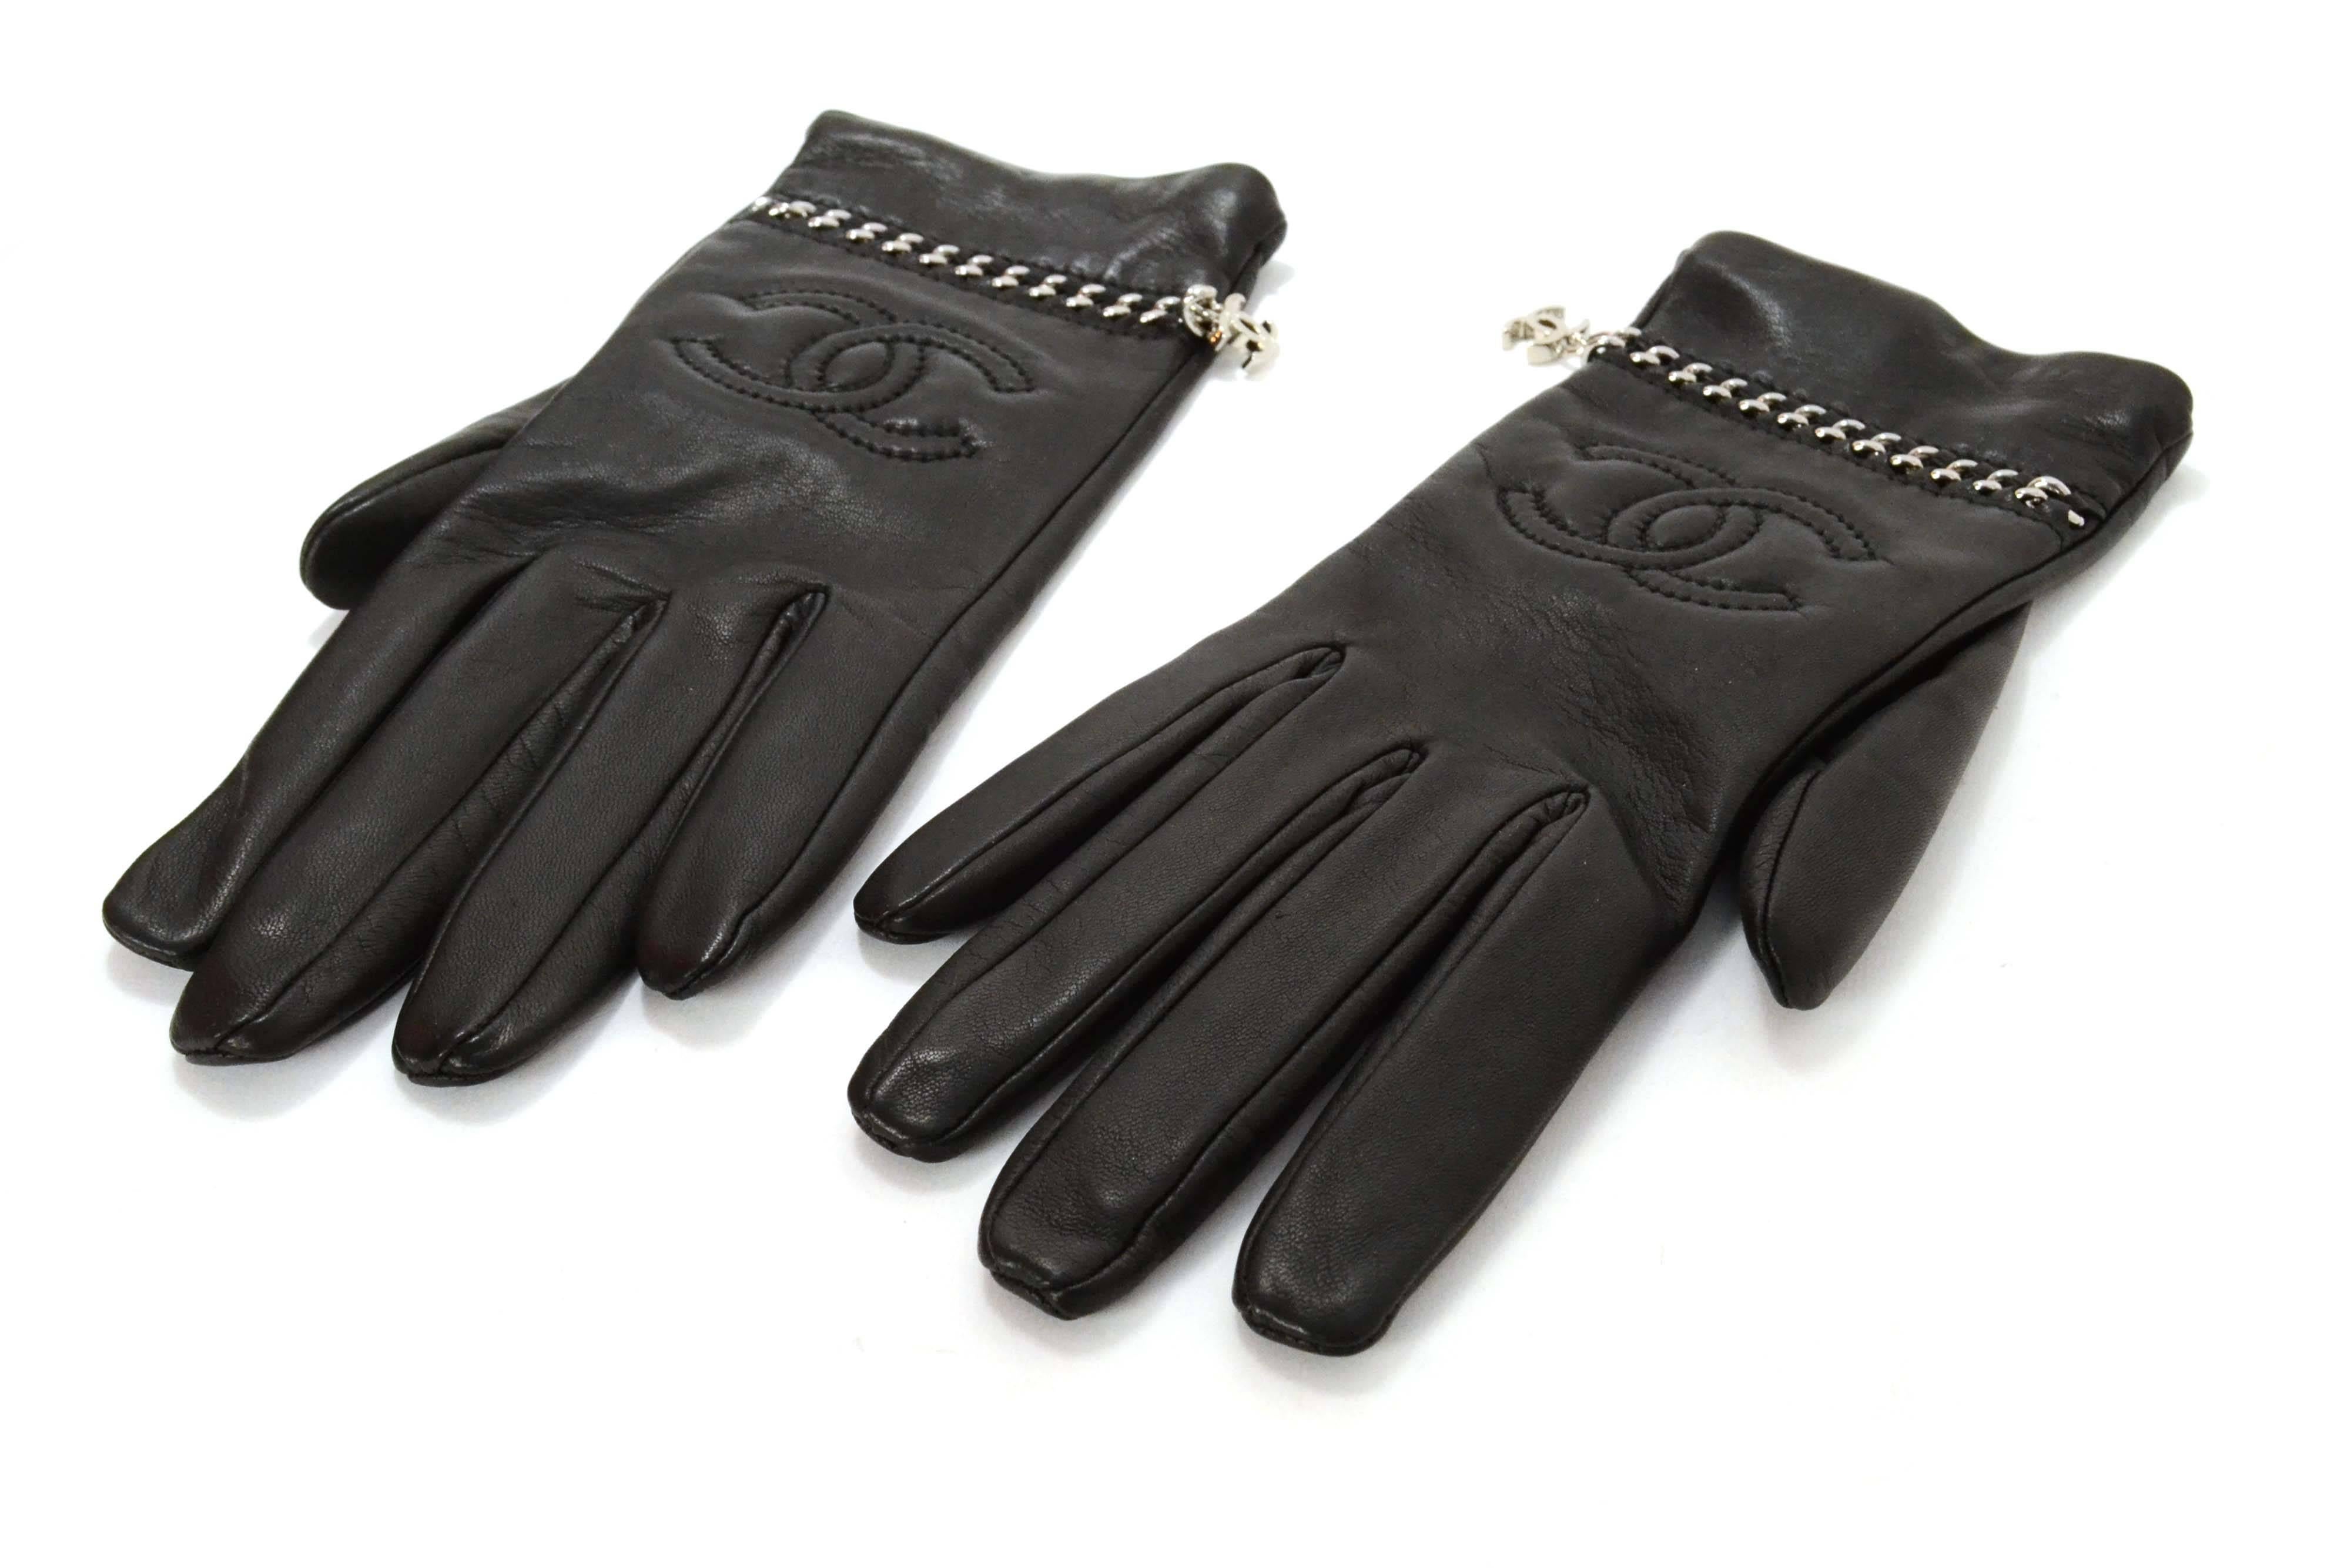 Chanel Black Leather & Silver Chain Through Gloves 
Features stitched CC's on top of hands as well as CC charm attached to silver chain
Made In: France
Year of Production: 2010
Color: Black and silvertone
Composition: 100% leather with metal